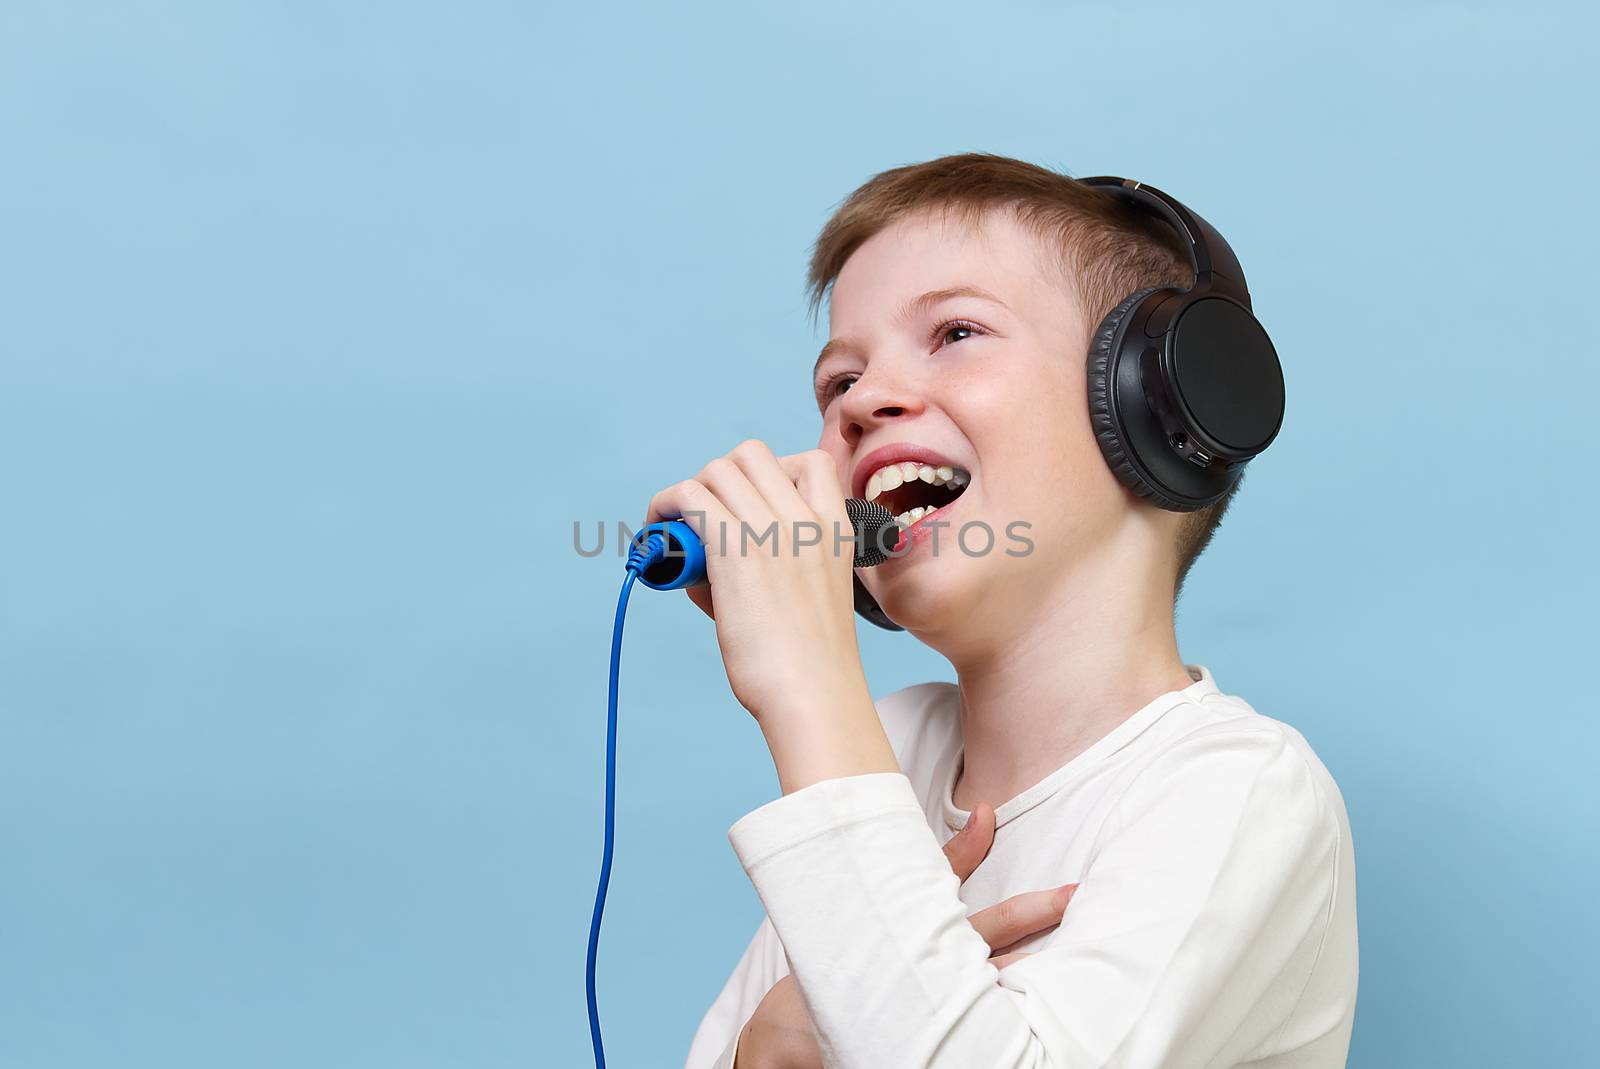 Smiling young handsome boy on a blue background in headphones. concept of baby radio, dj, singer or karaoke. happiness be music everywhere